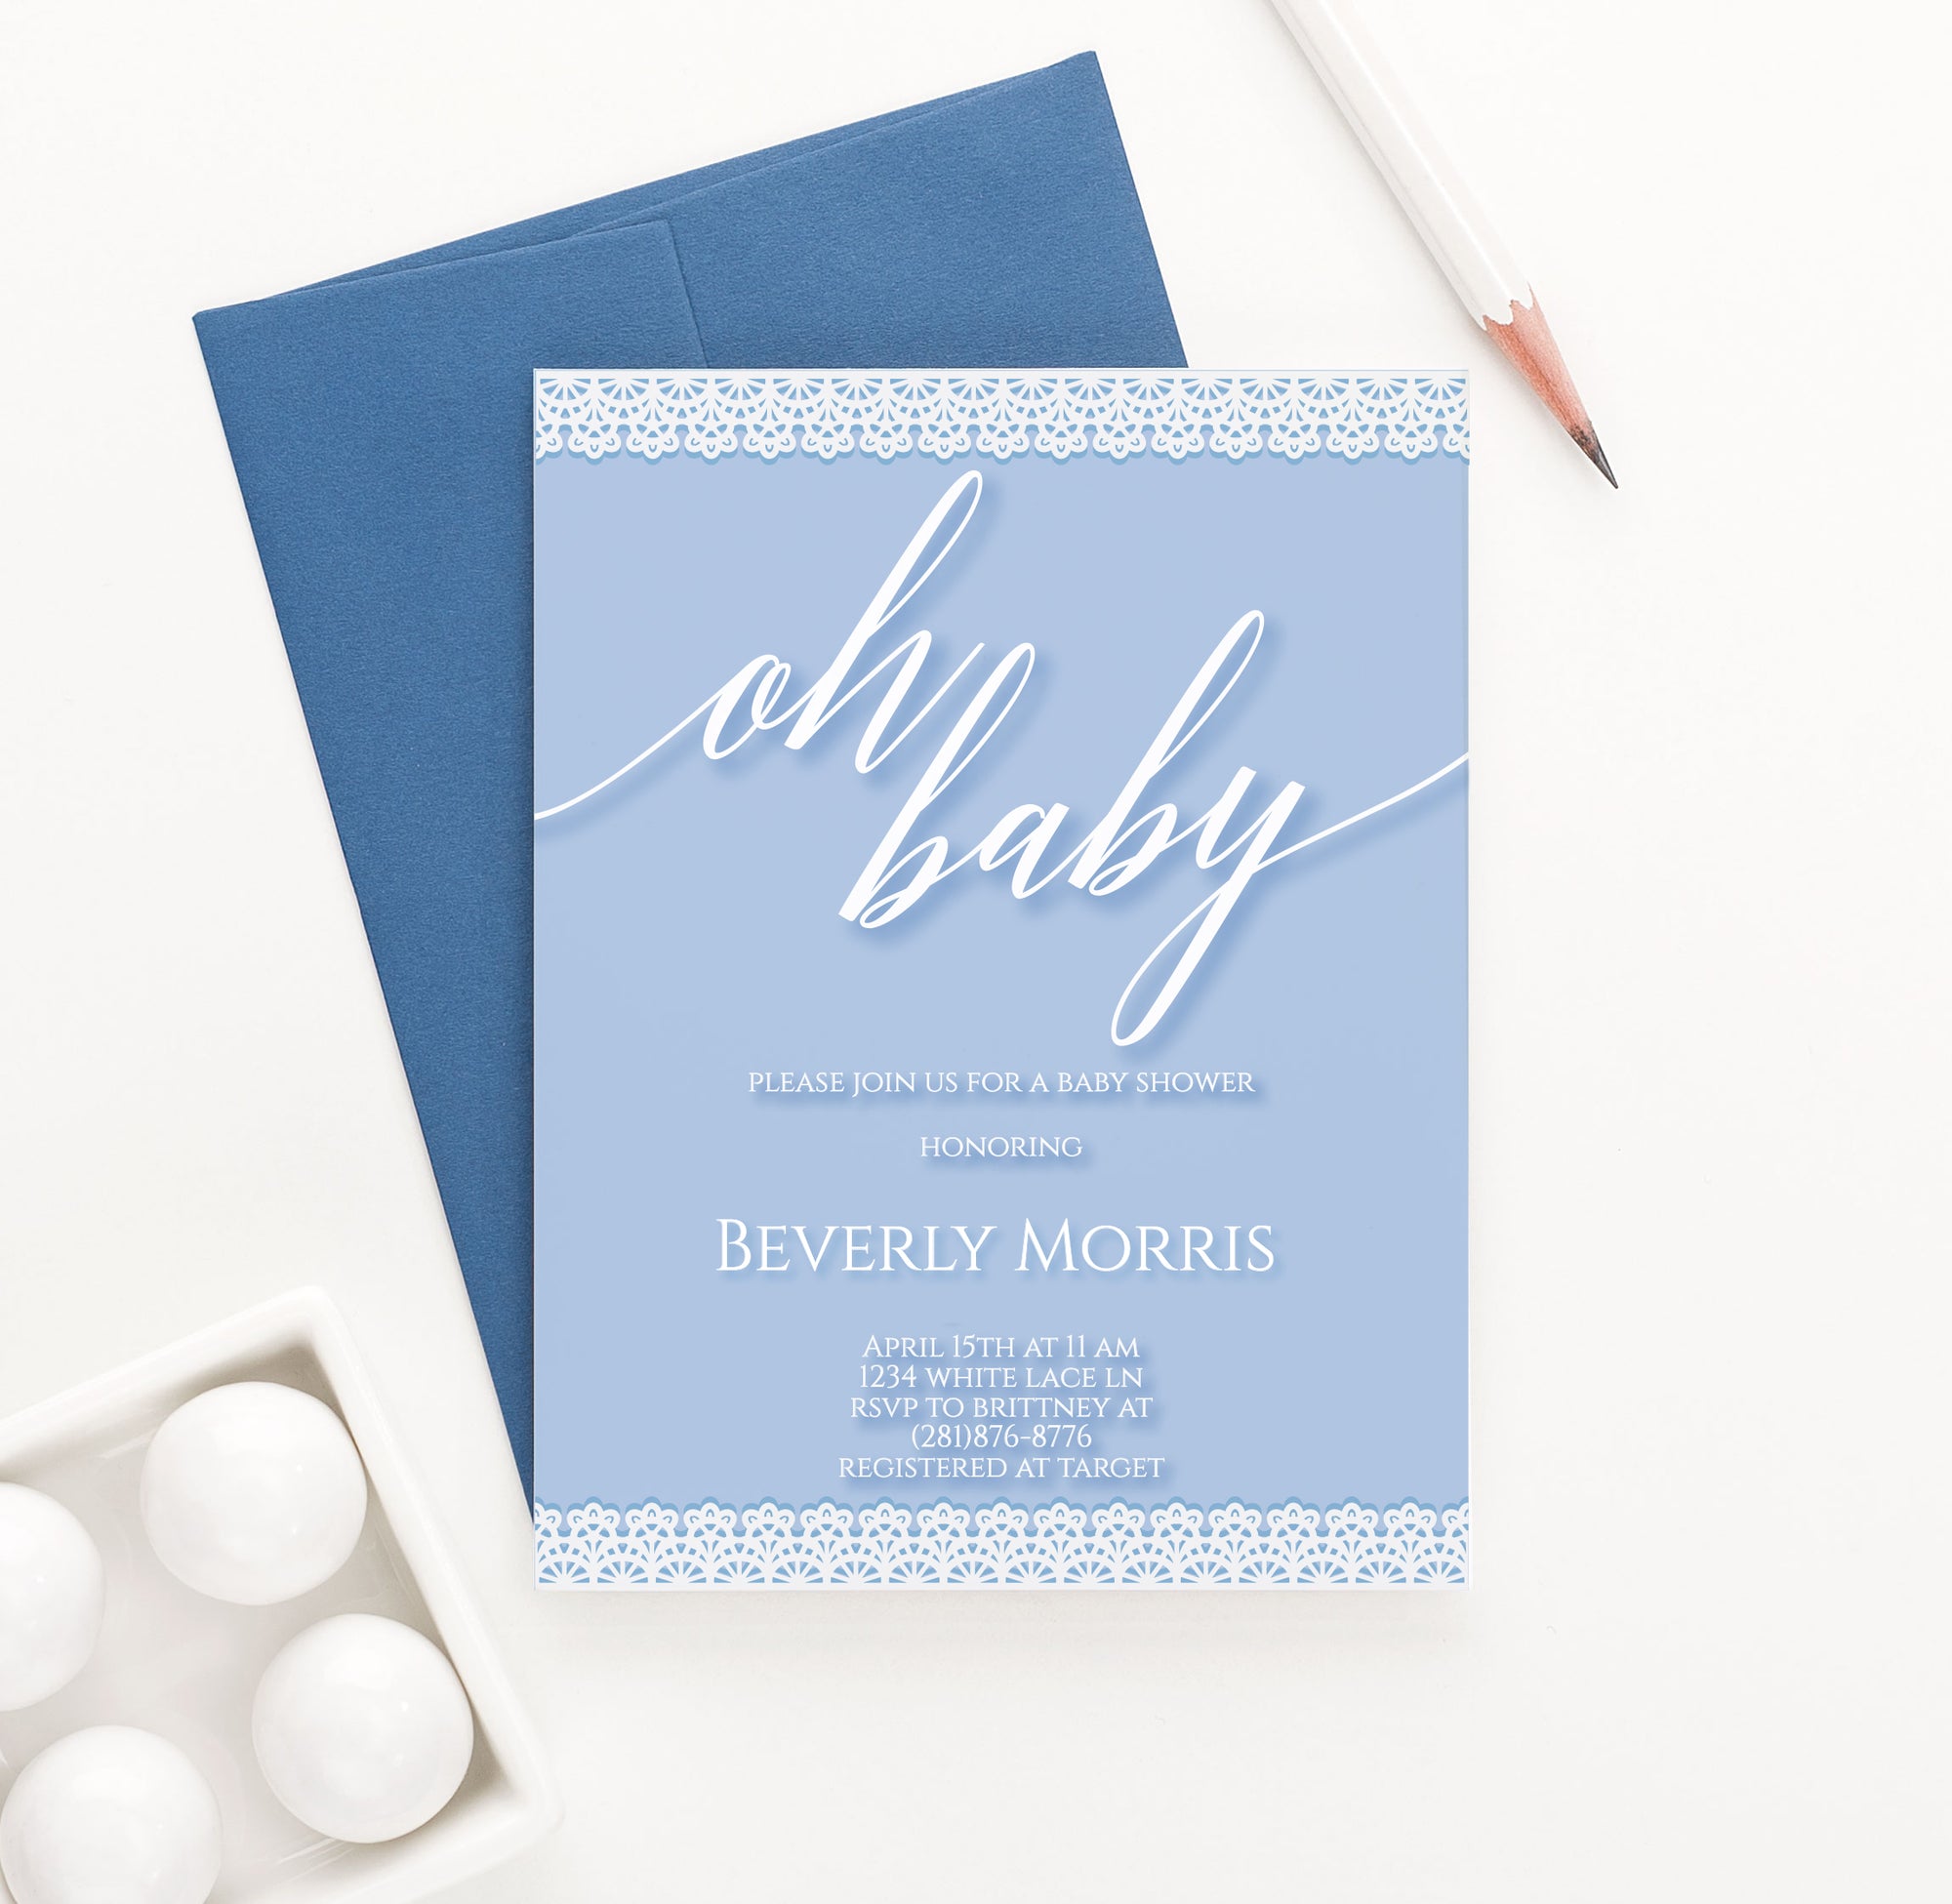 Personalized Blue With White Lace Baby Shower Invitations Boy